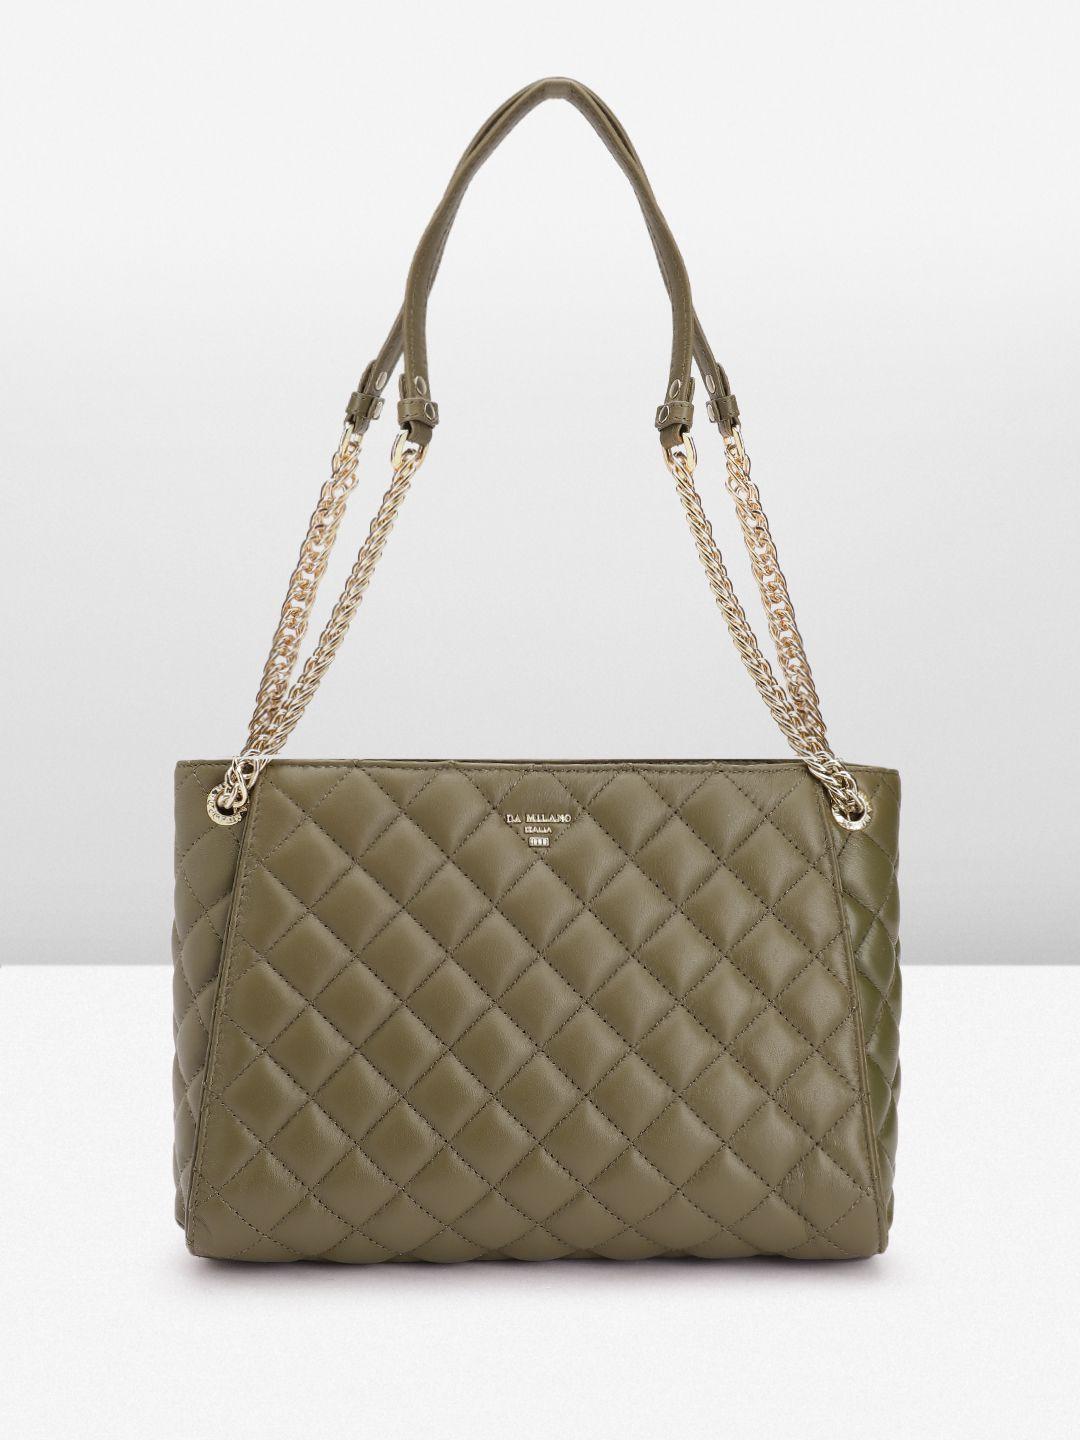 da milano quilted textured leather structured shoulder bag